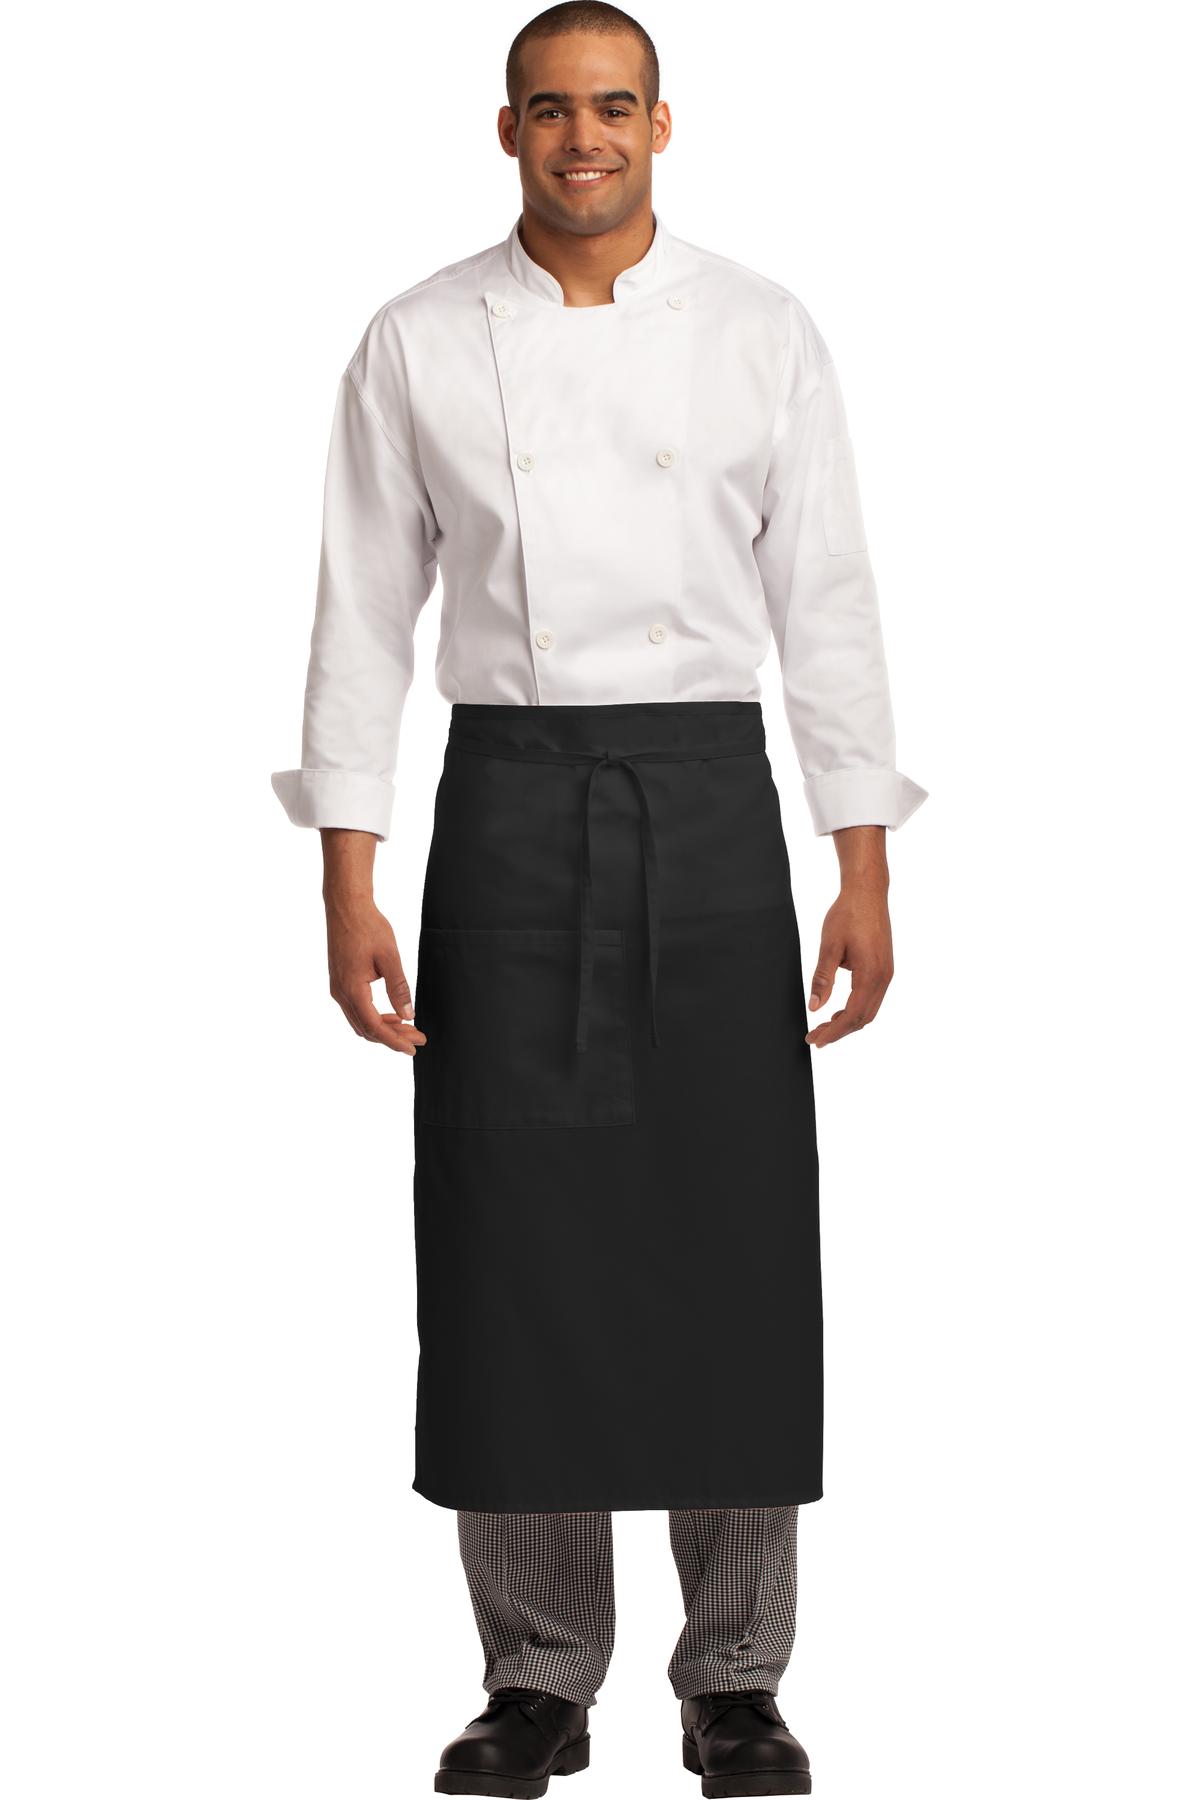 Easy Care Full Bistro Apron with Stain Release. A701